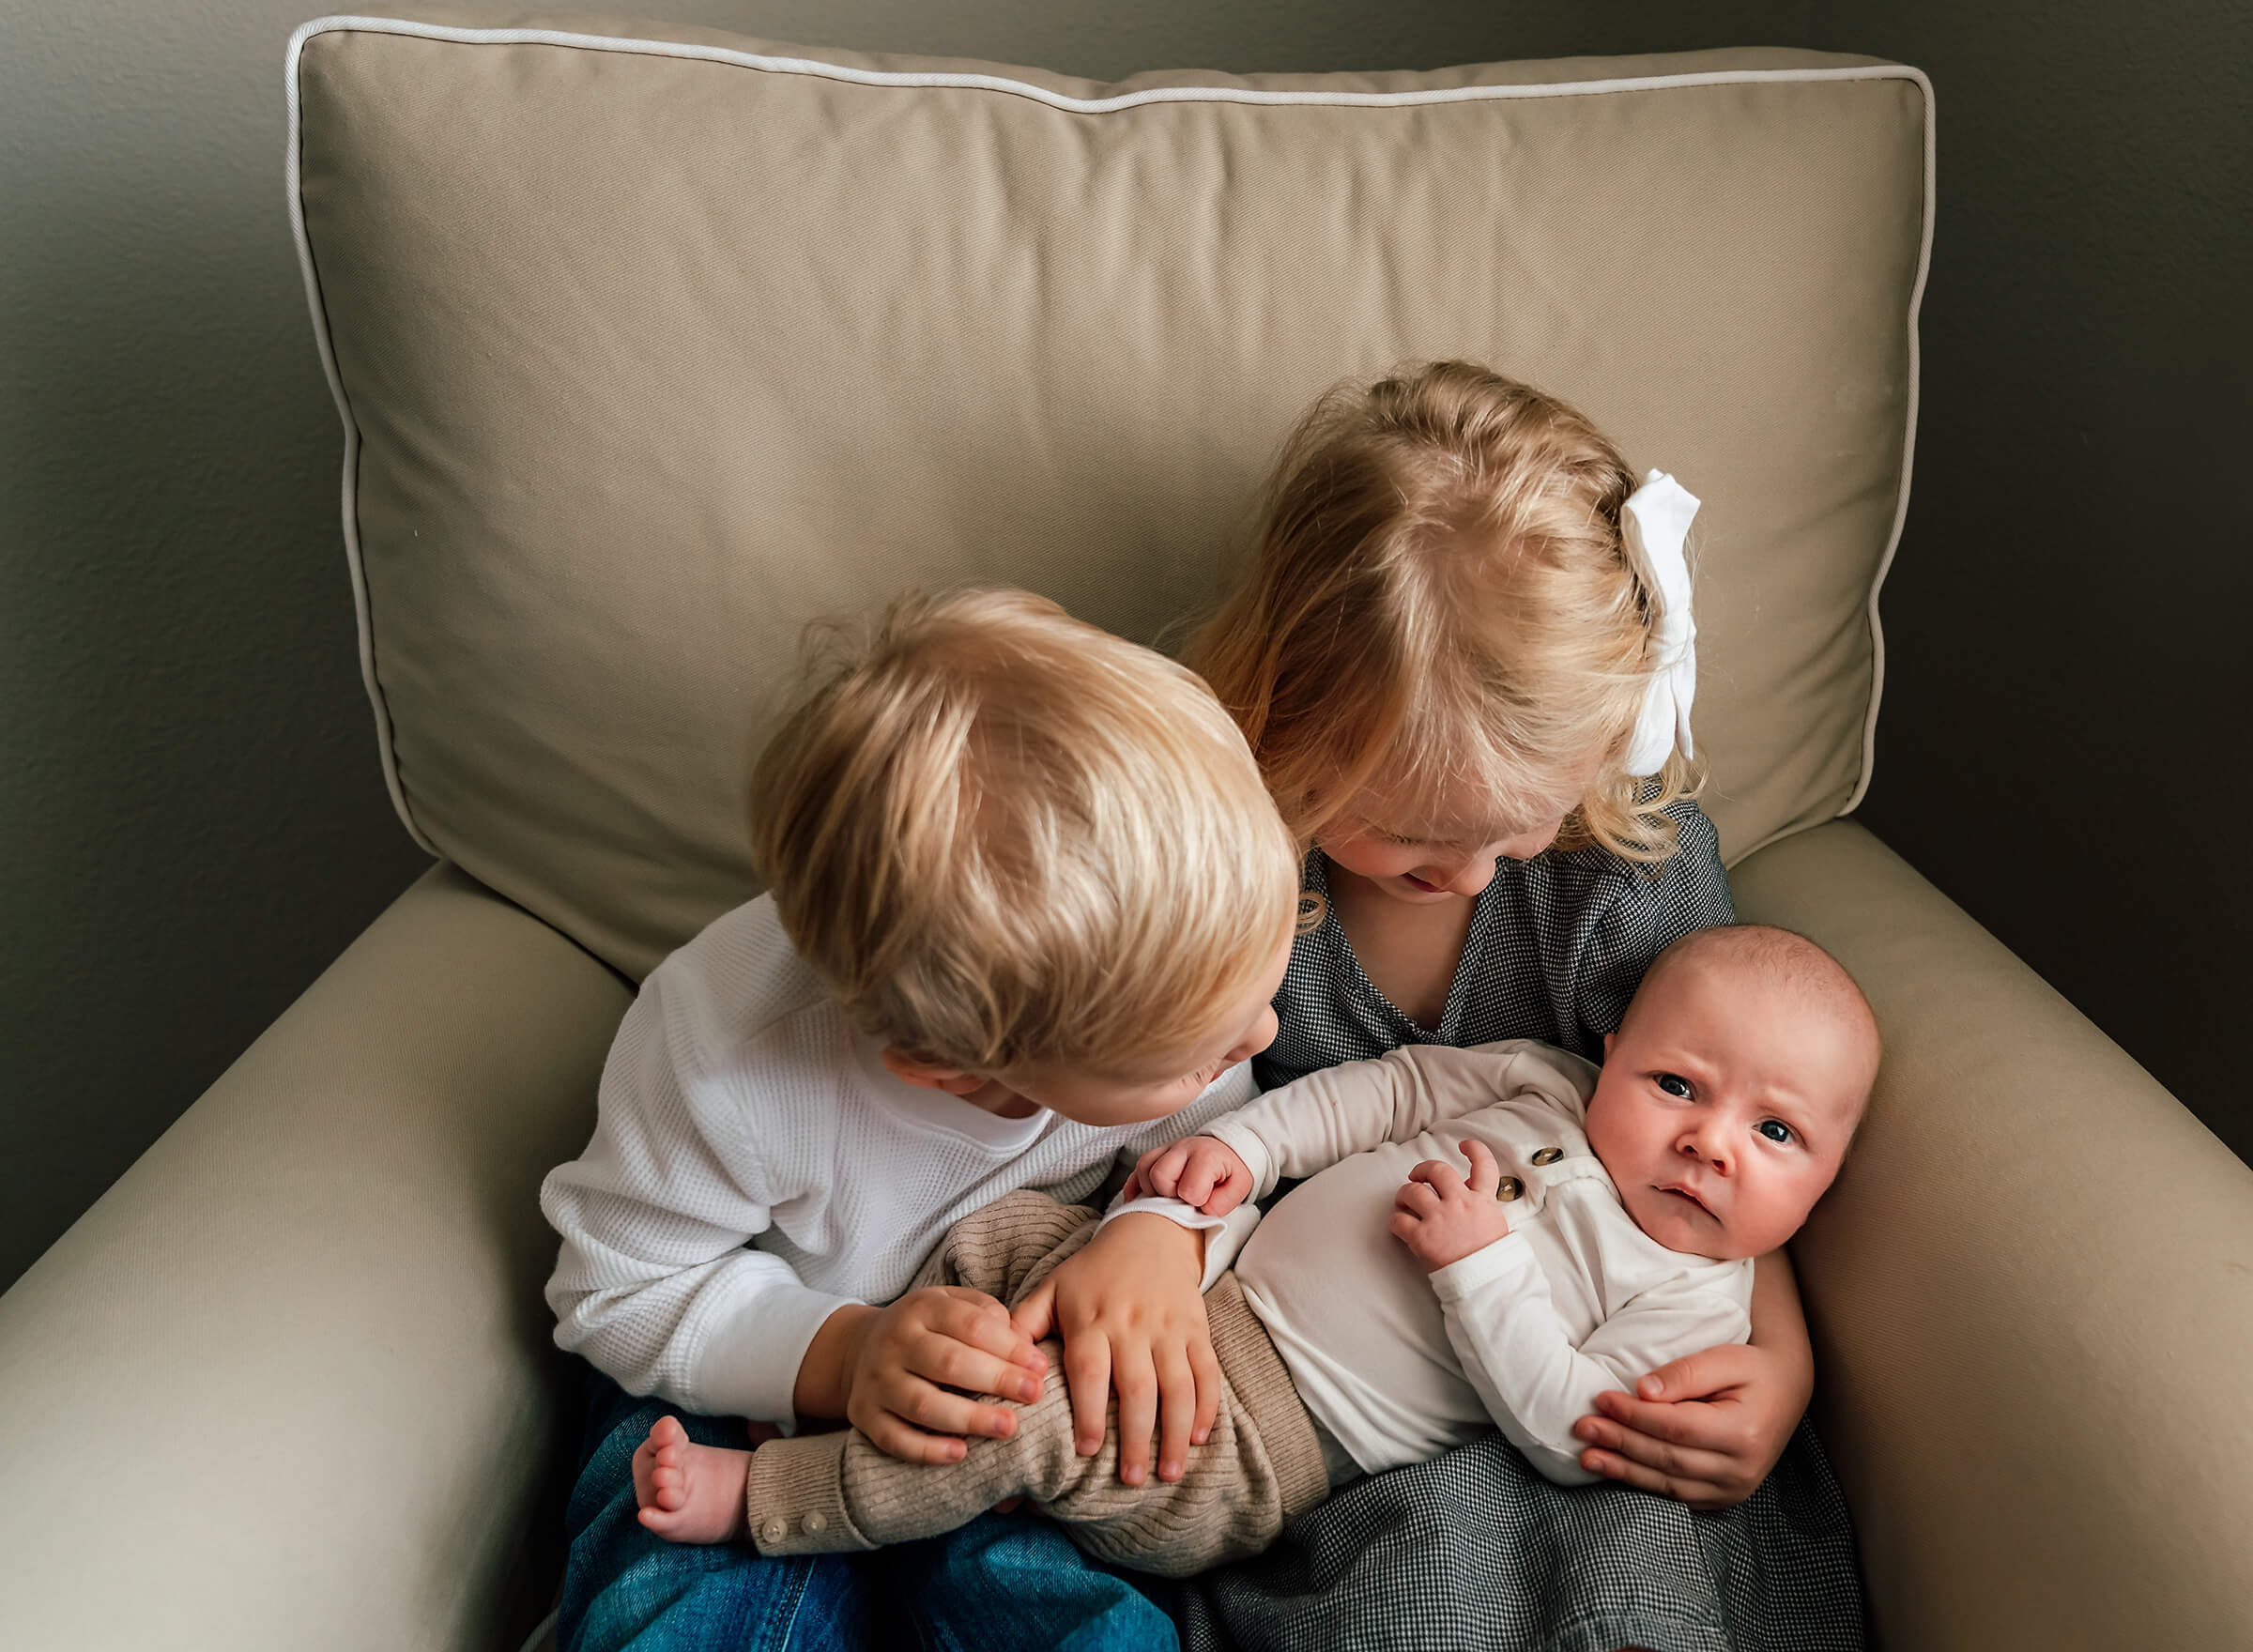 siblings interacting with their new baby brother at home